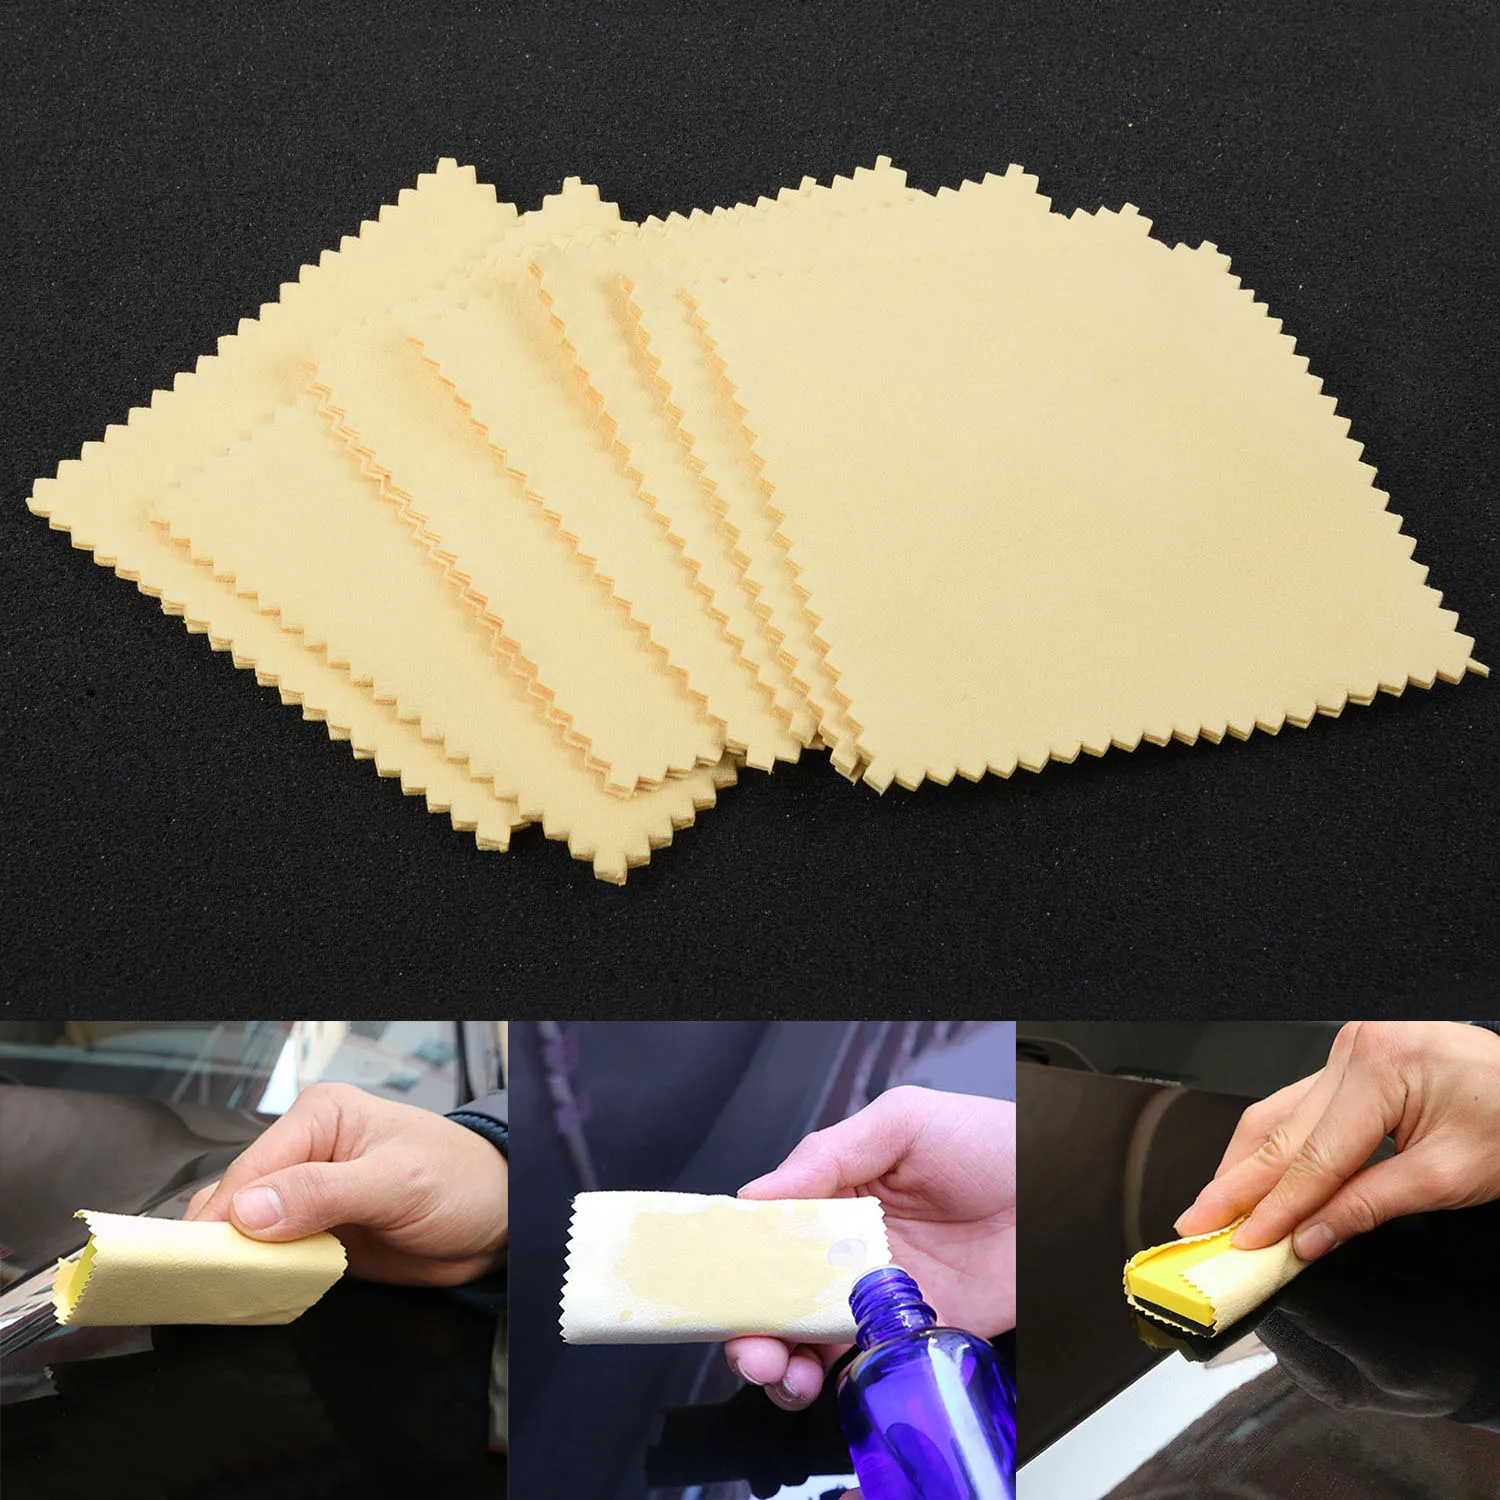 

20PCS 10*10cm Microfiber Cleaning Cloth Nano Car Glass Coating Lint-free Waxing Towel Car Body Cleaning Towel Widely Application